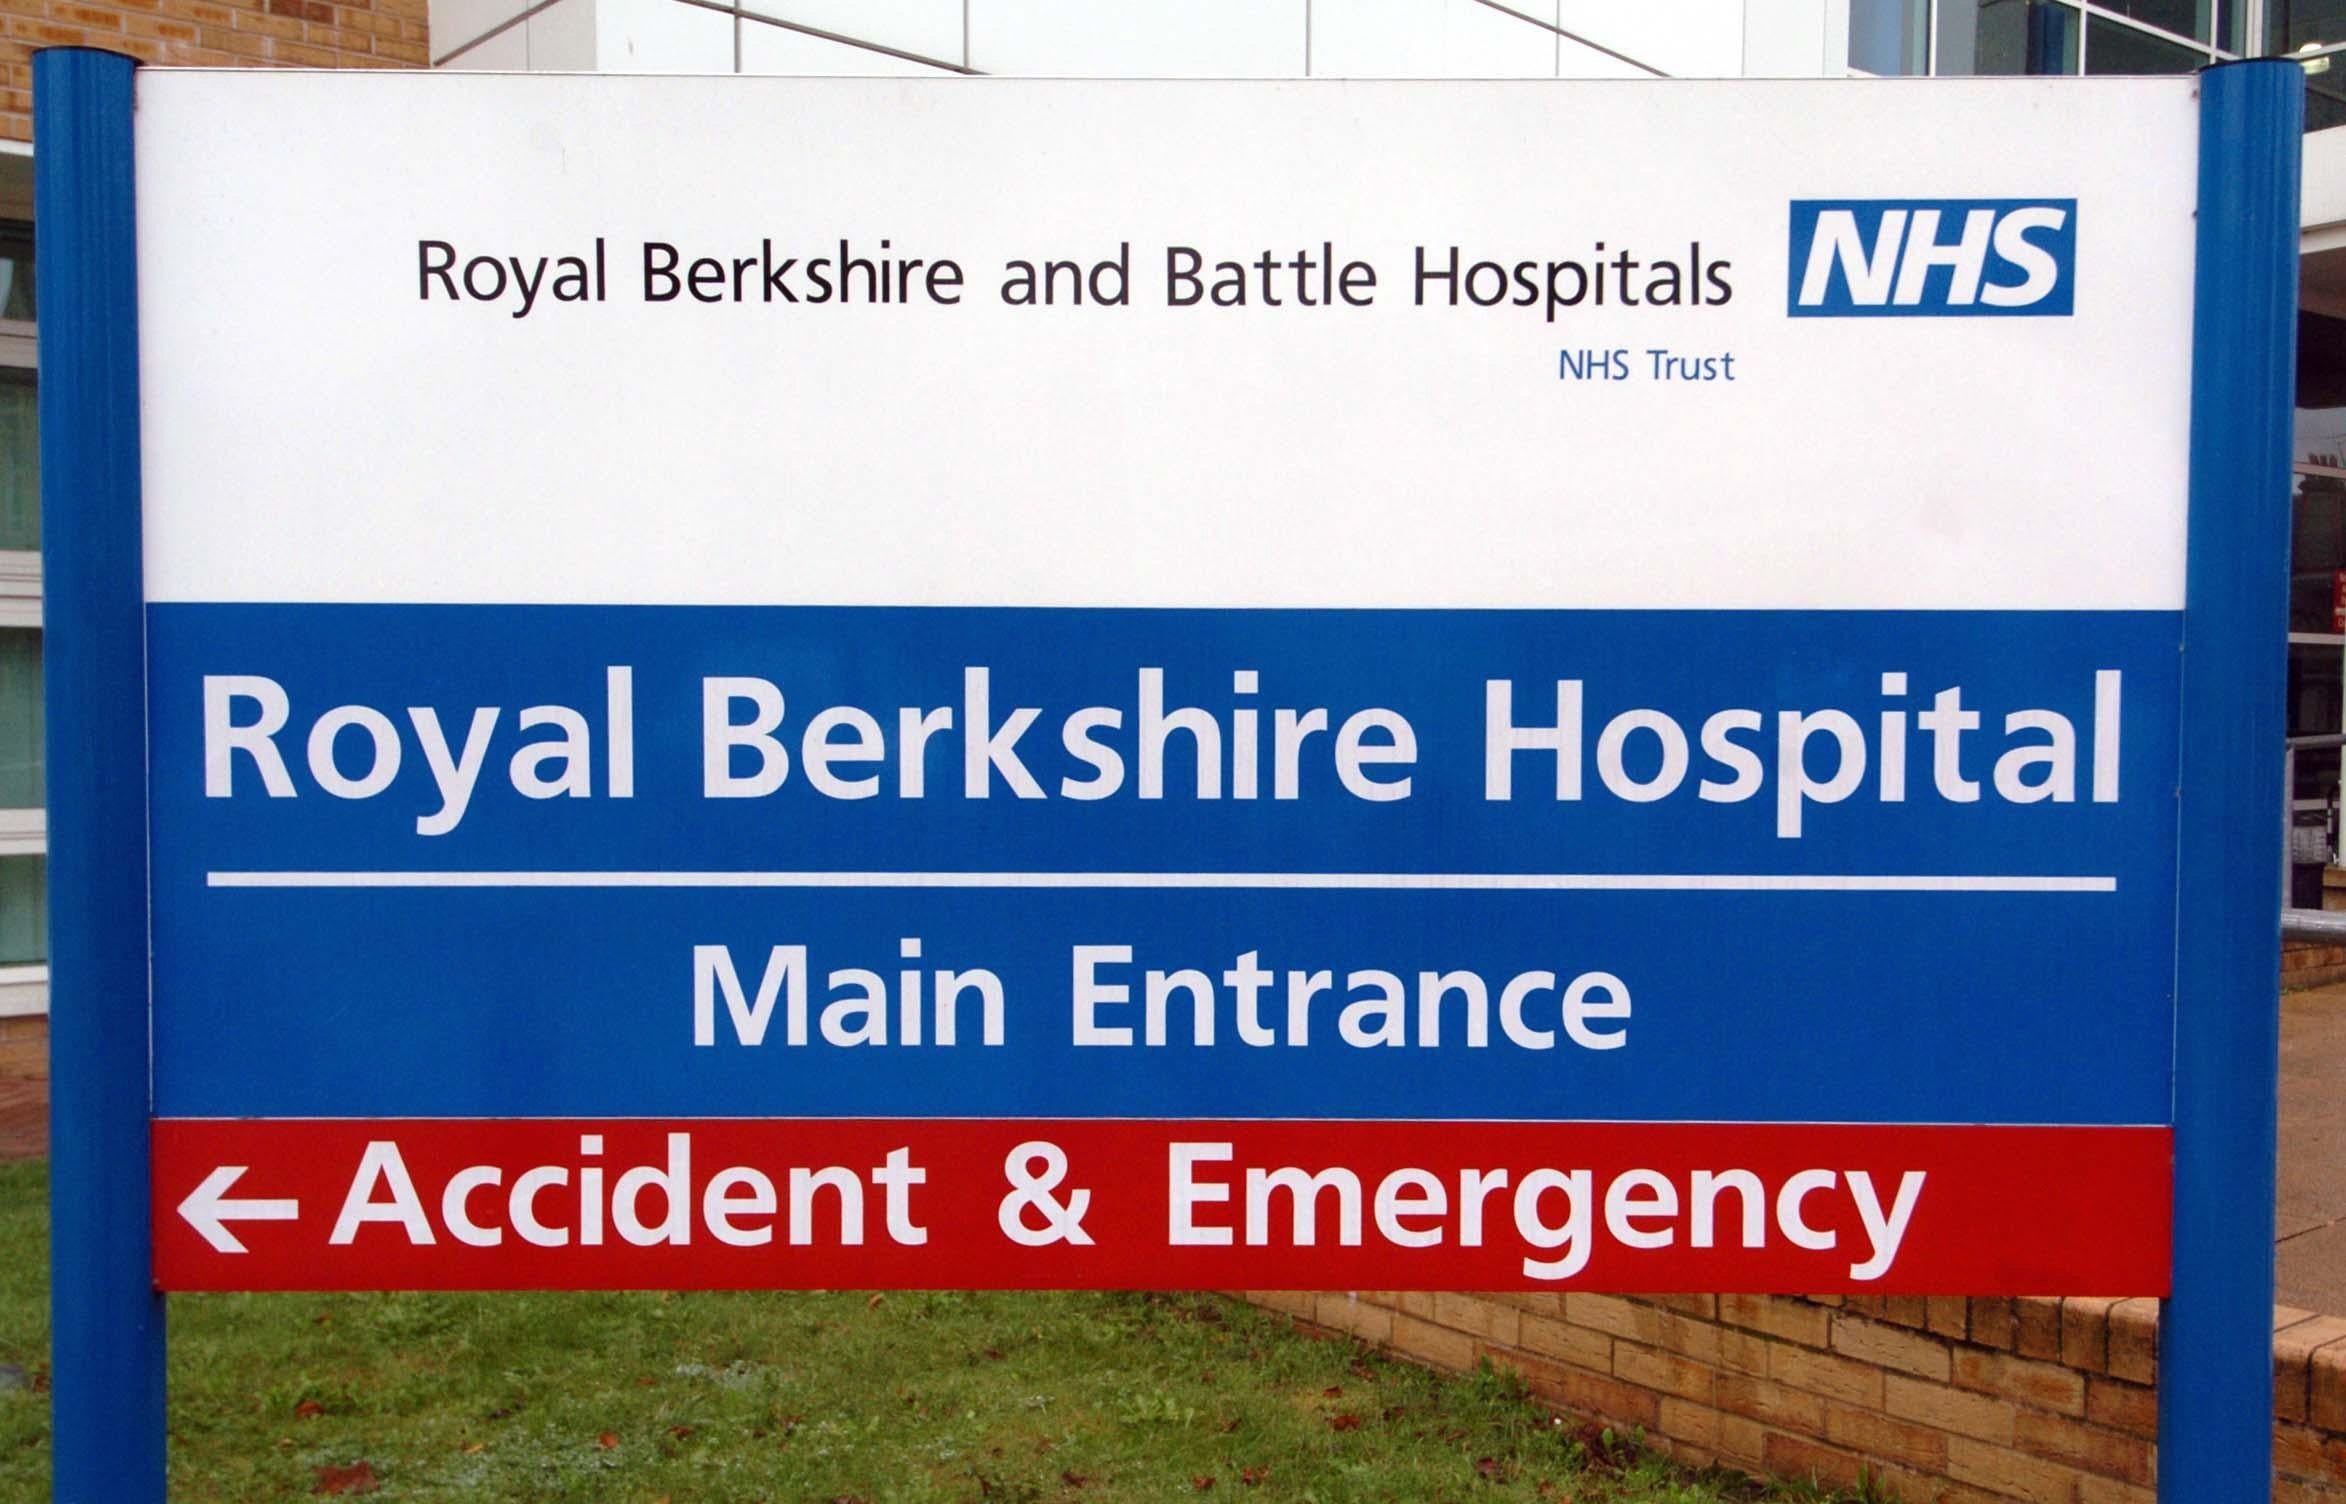 Royal Berkshire Hospital has yet to respond to the allegation